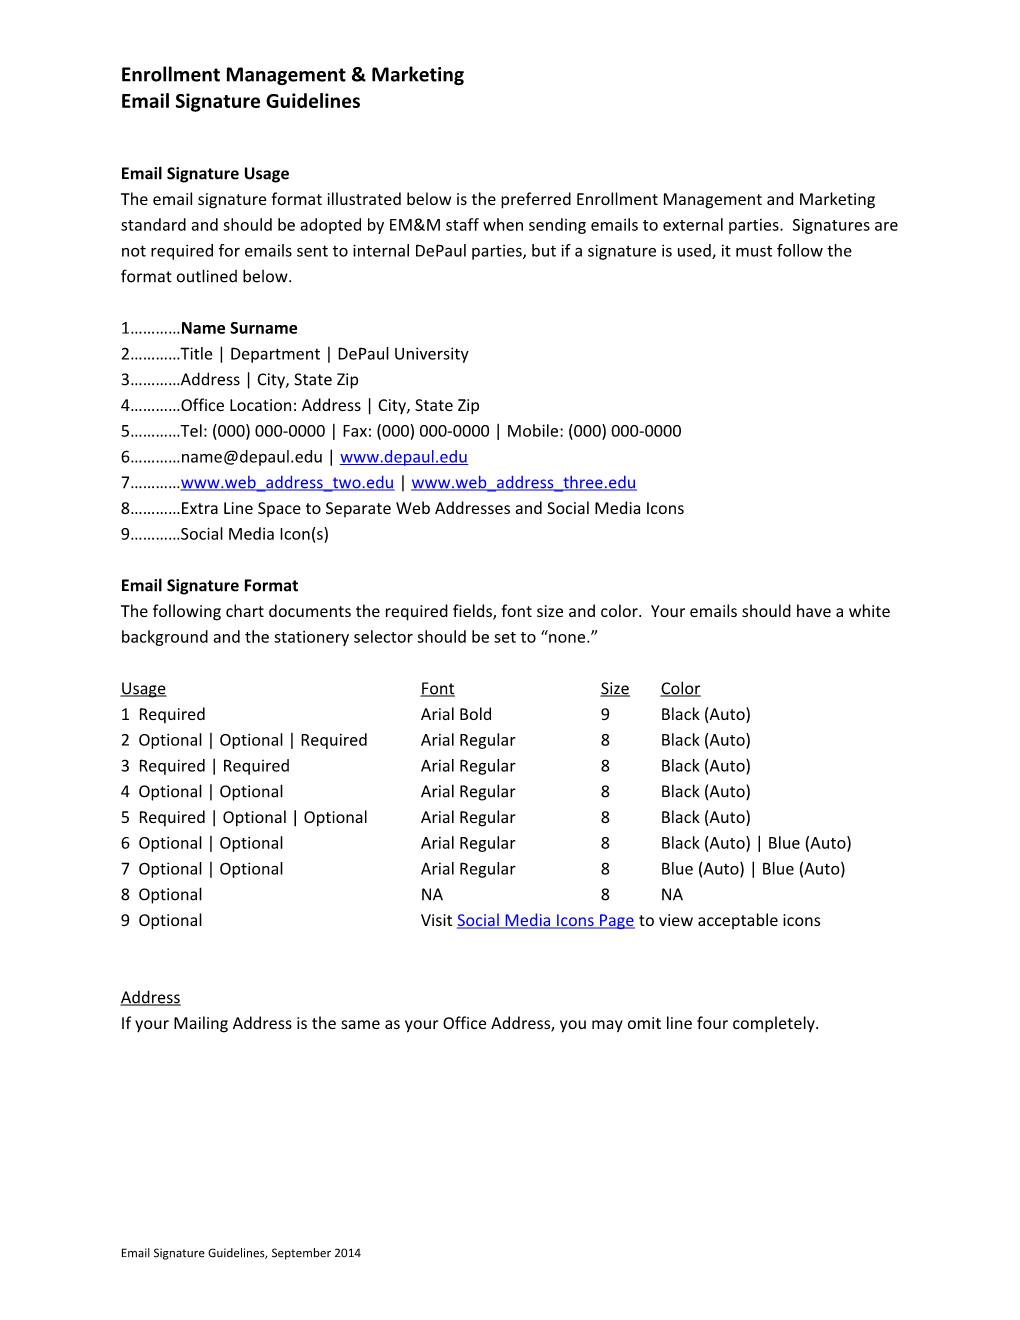 Email Signature Guidelines